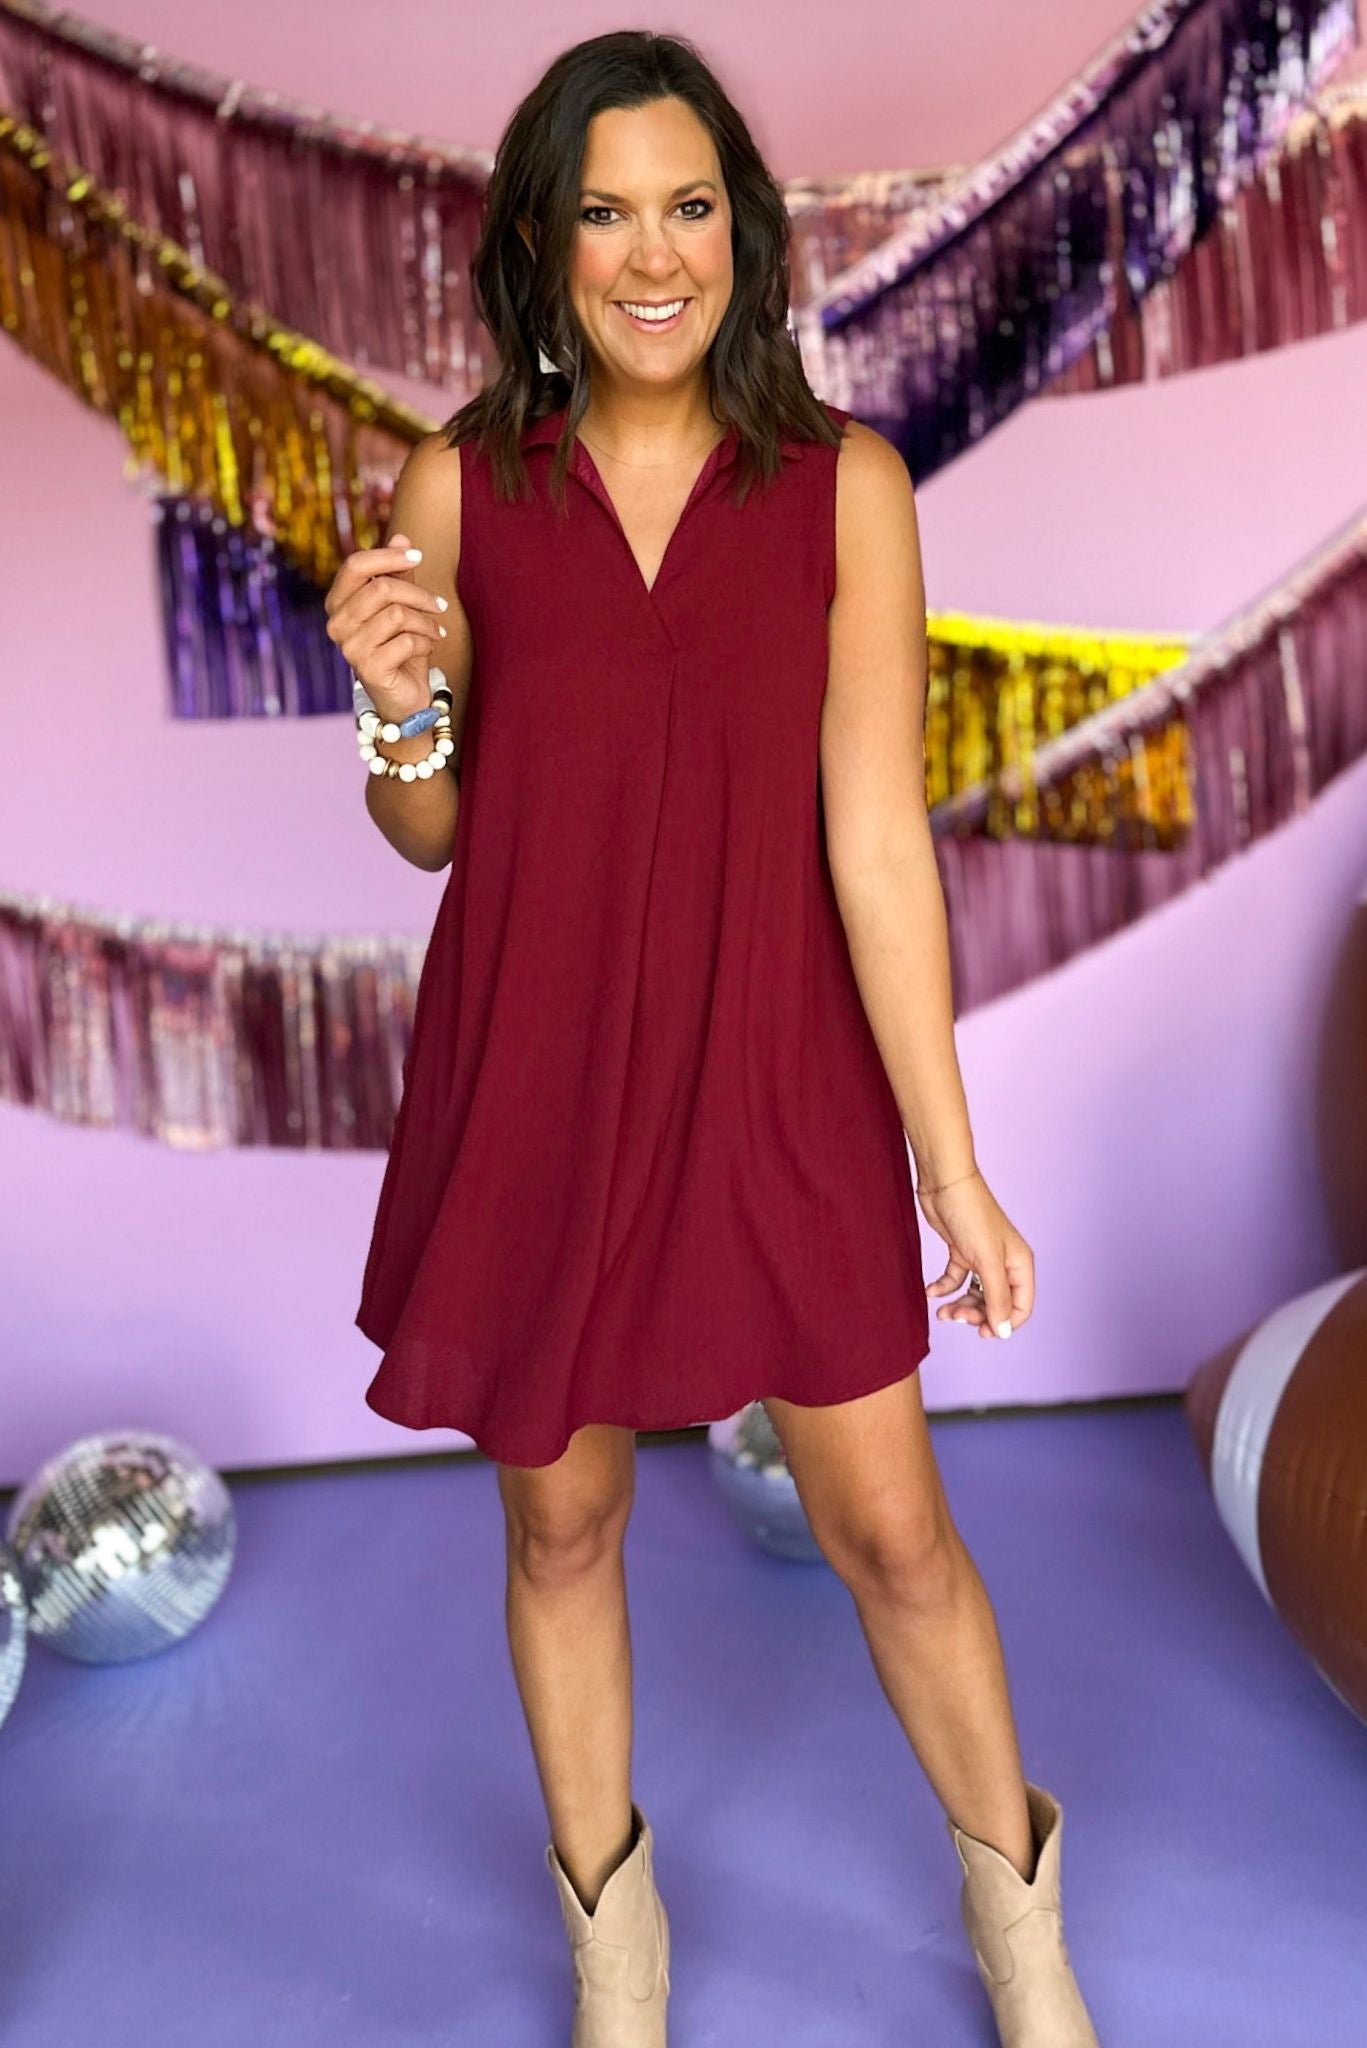 SSYS Maroon Sleeveless Collared Crepe Dress, game day style, gameday dress, game day essential, gameday must have, elevated style, mom style, aggie gameday, missouri gameday, shop style your senses by mallory fitzsimmons